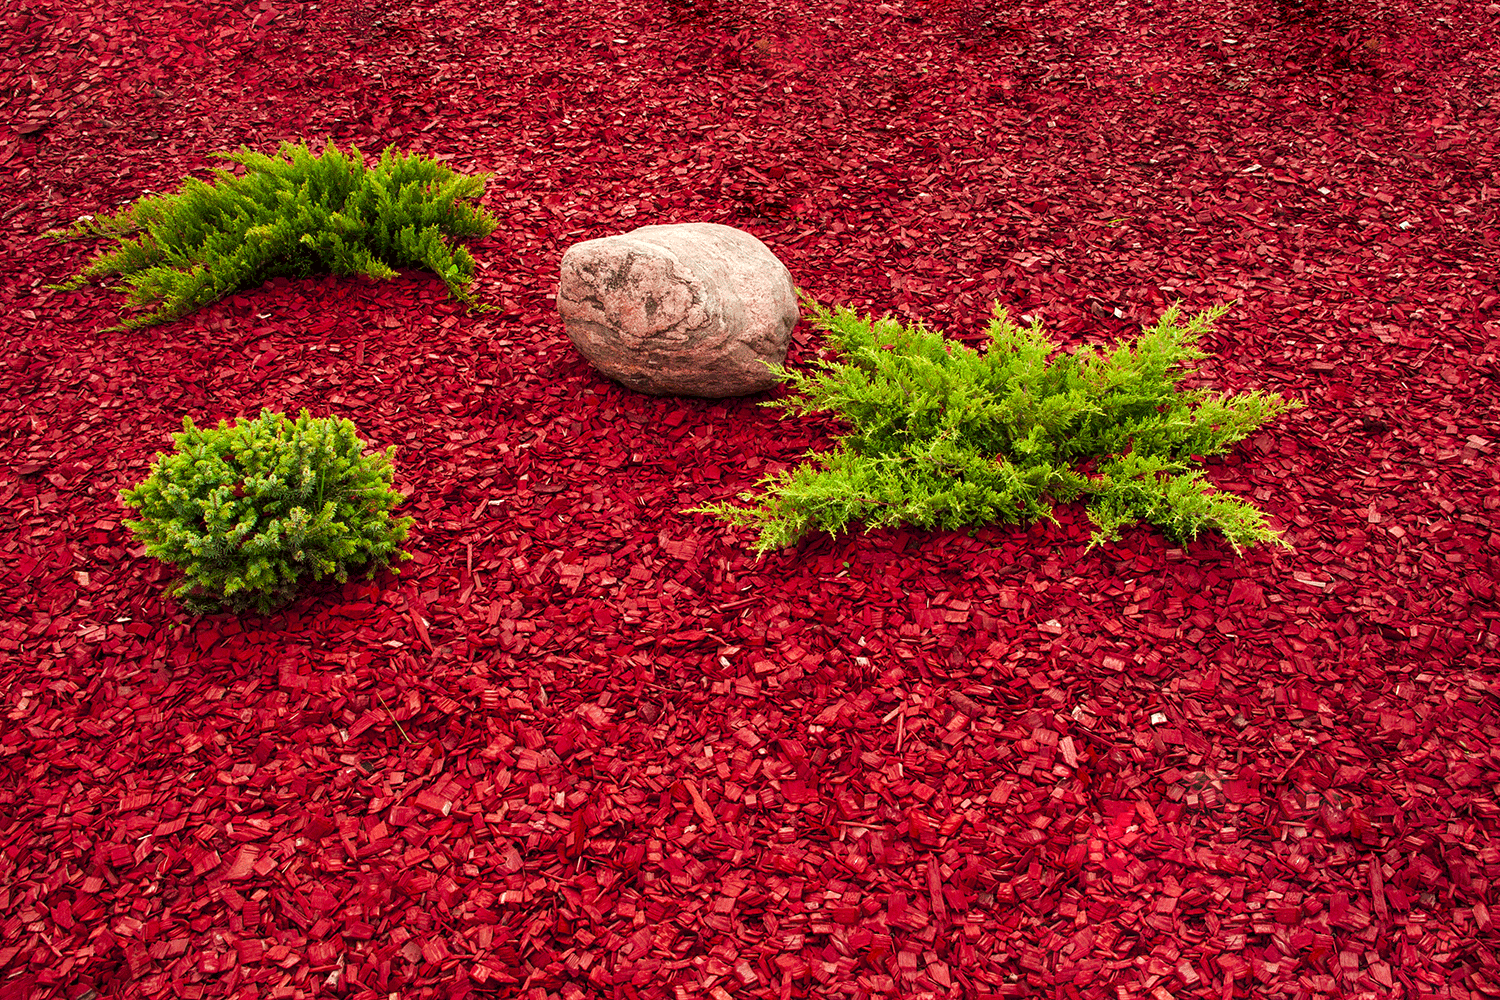 Landscape with stones and red sawdust